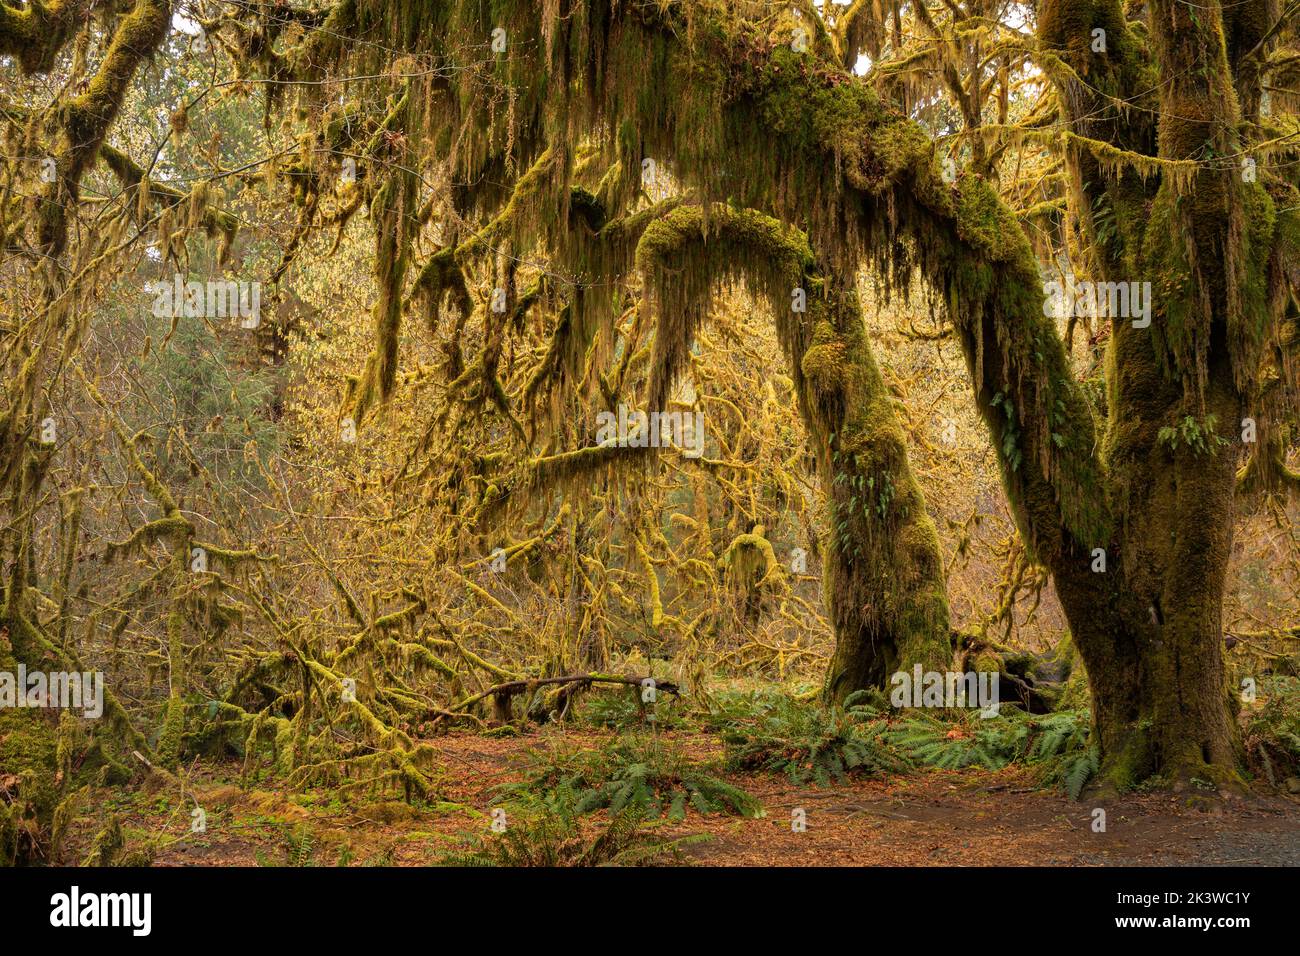 WA22095-00...WASHINGTON - Maple trees covered with moss  in the Hall of Mosses, part of the Hoh Rain Forest , In Olympic National Park. Stock Photo